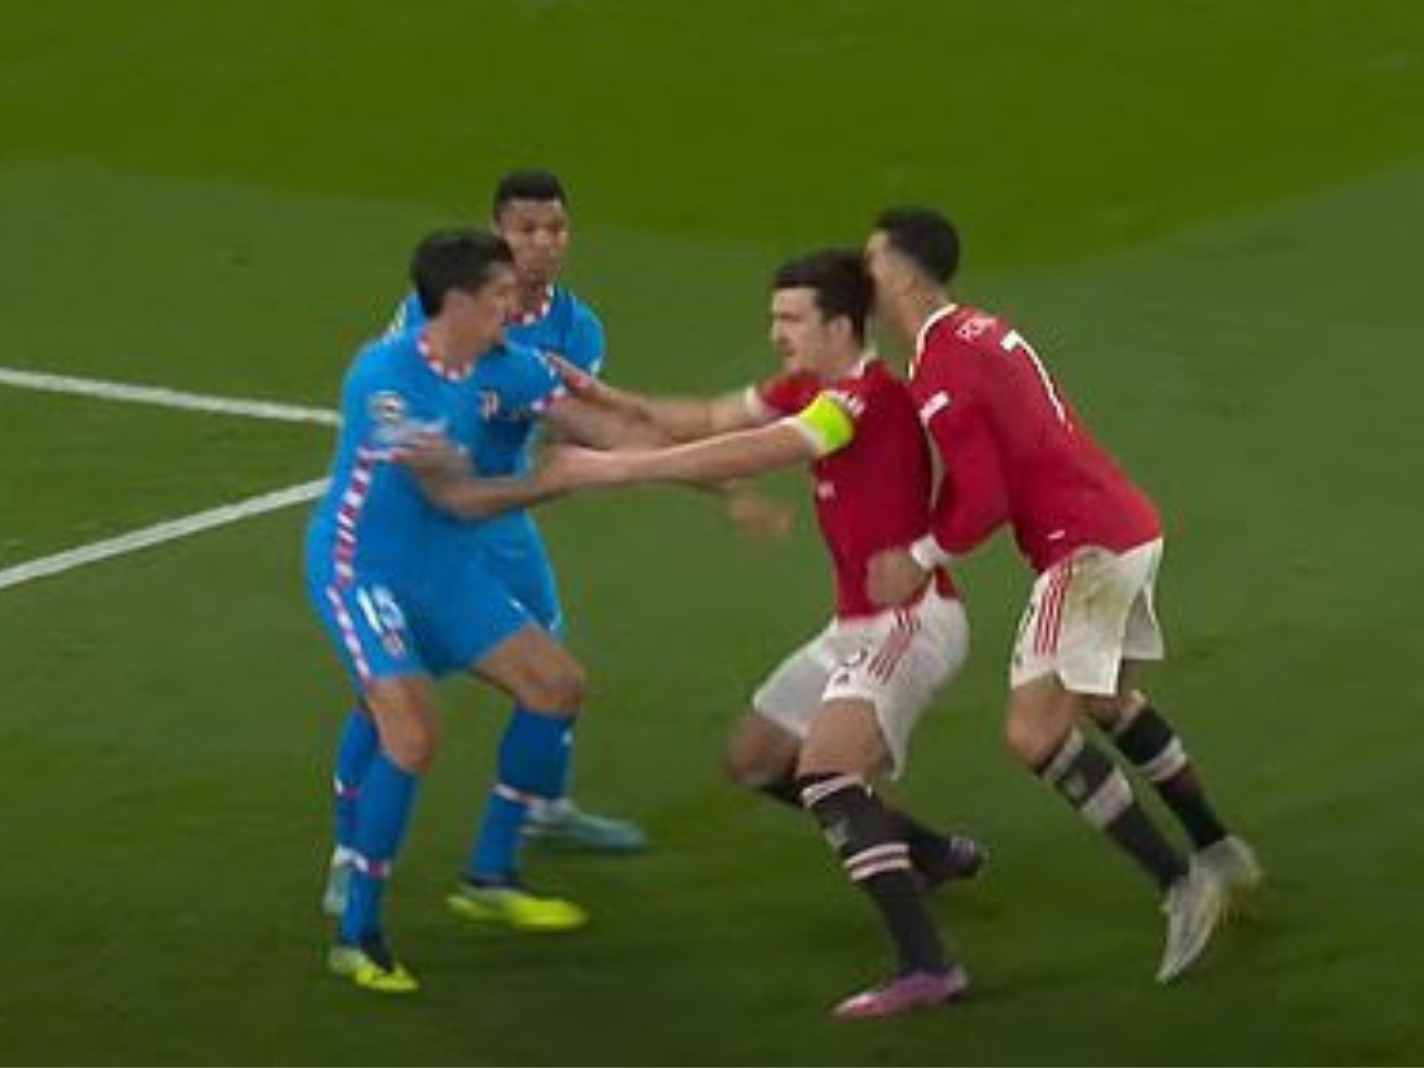 The head clash between Harry Maguire and Cristiano Ronaldo